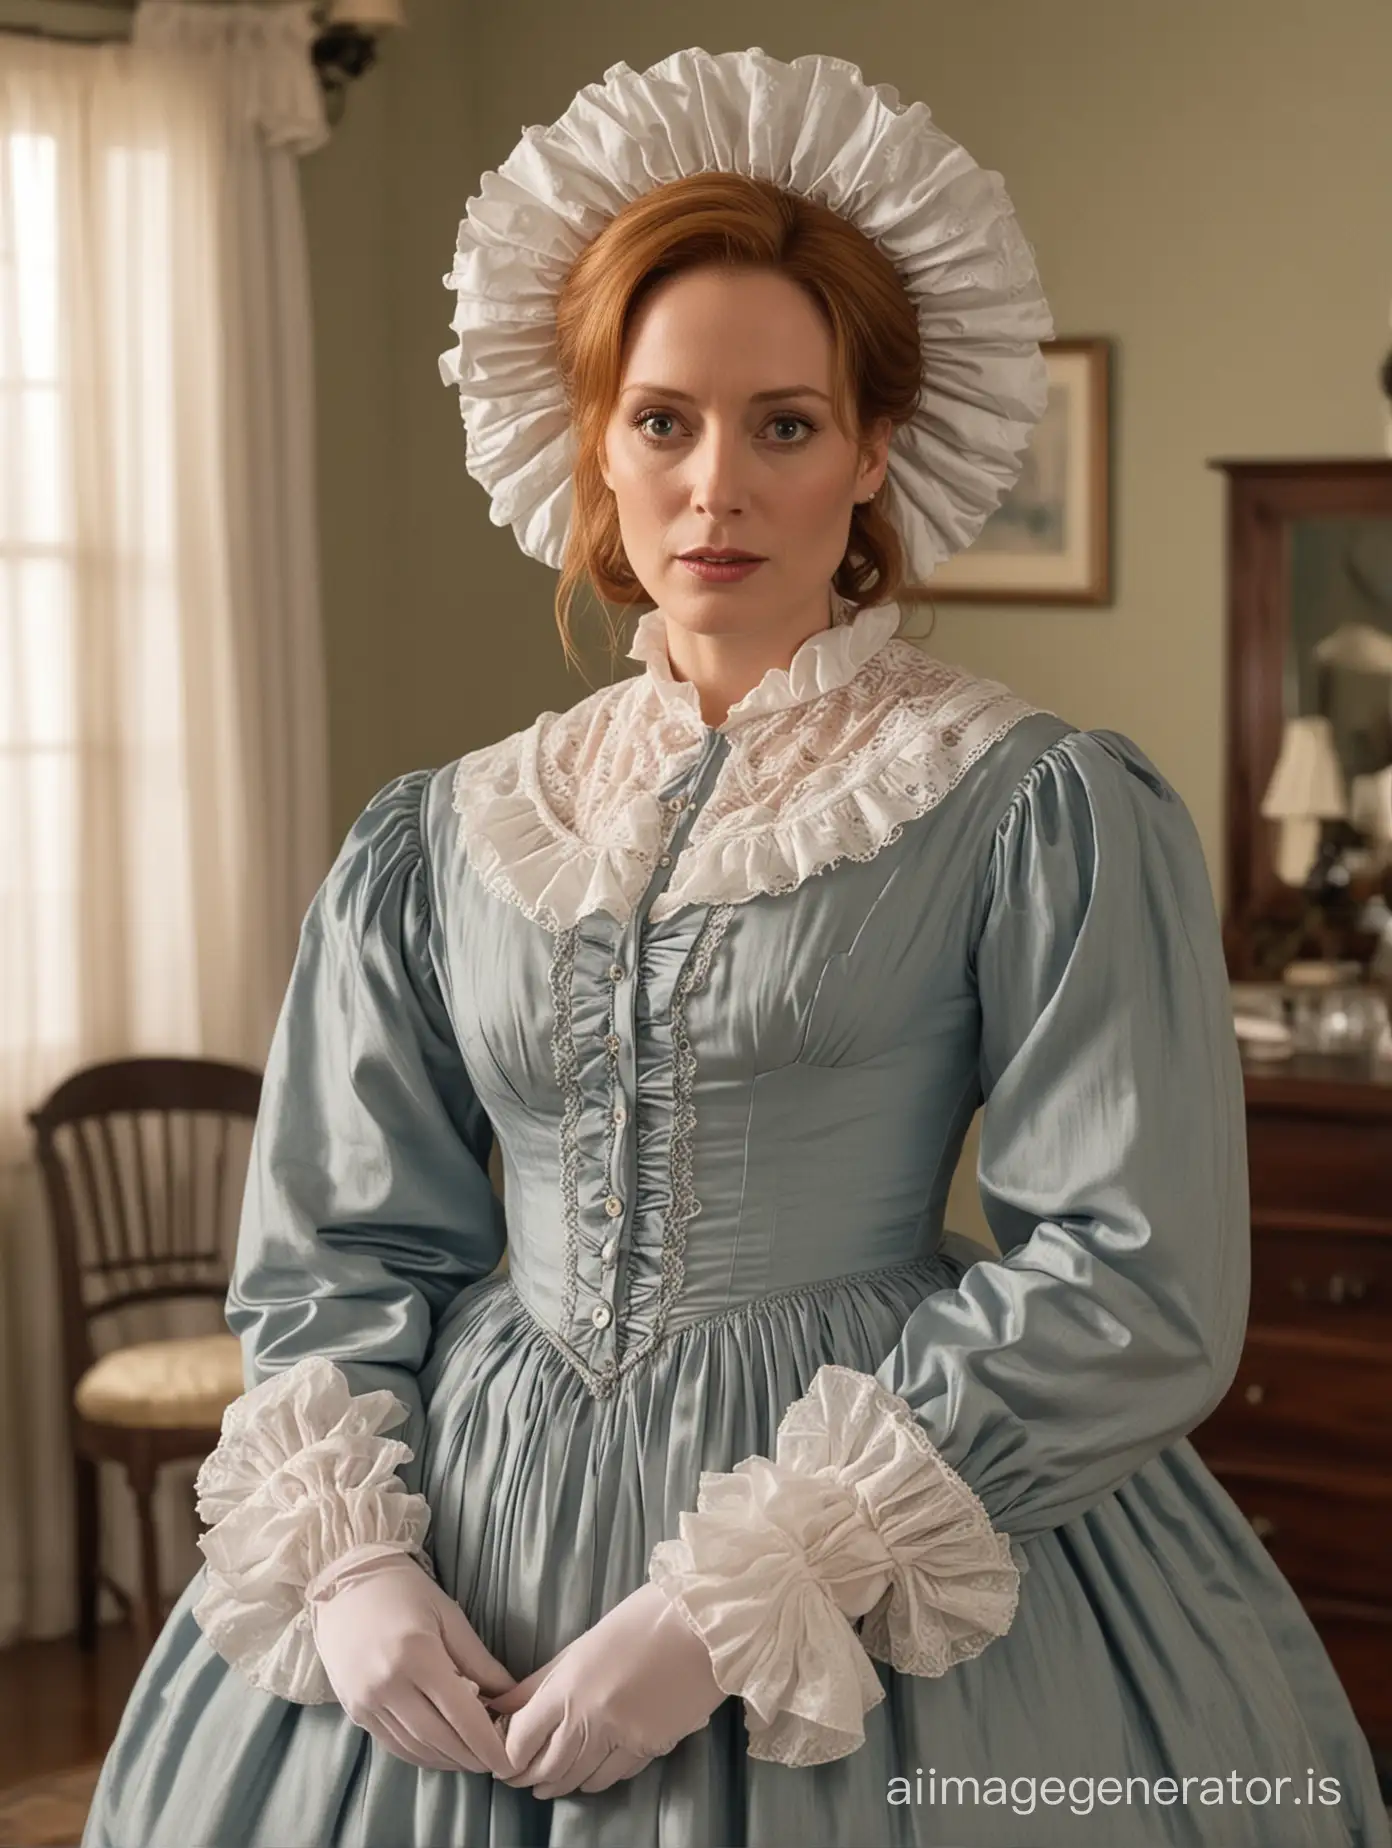 Victorian-Styled-Dana-Scully-in-Elegant-Attire-with-Frilly-Bonnet